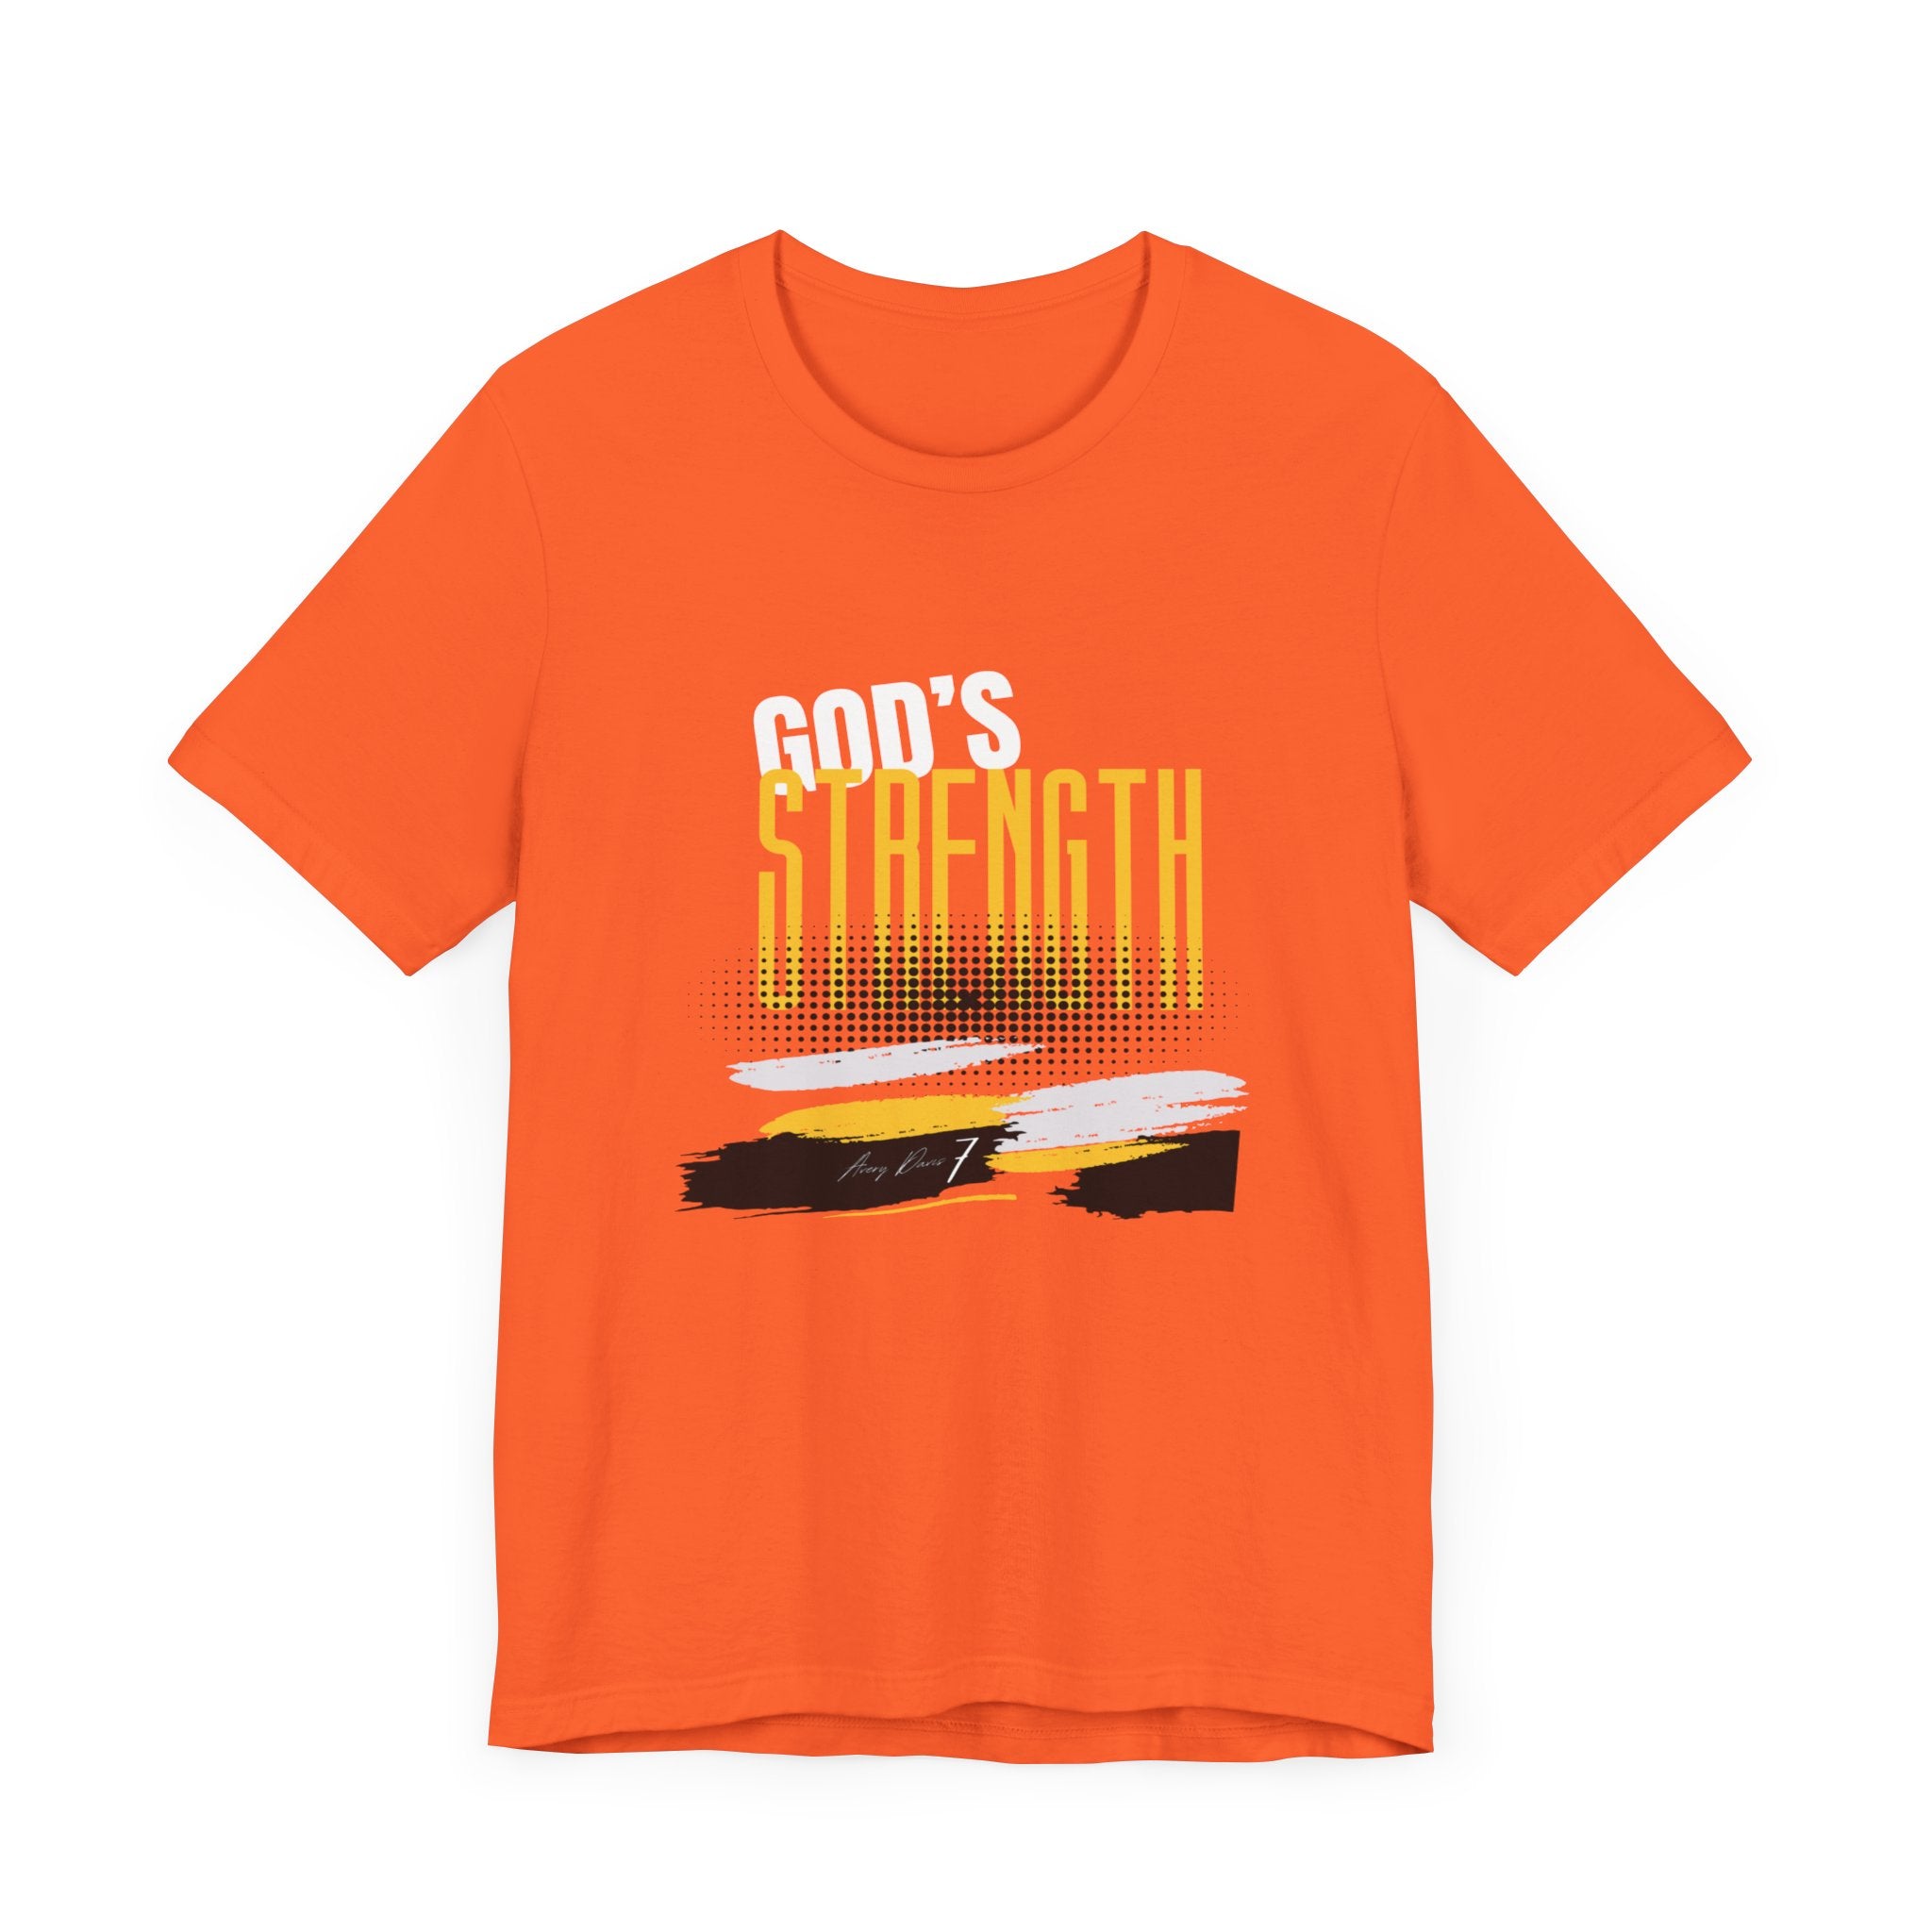 God's Strength T-shirt, Unisex Jersey Tee, DTG Printed Shirt, Crew Neck, Men's and Women's Clothing